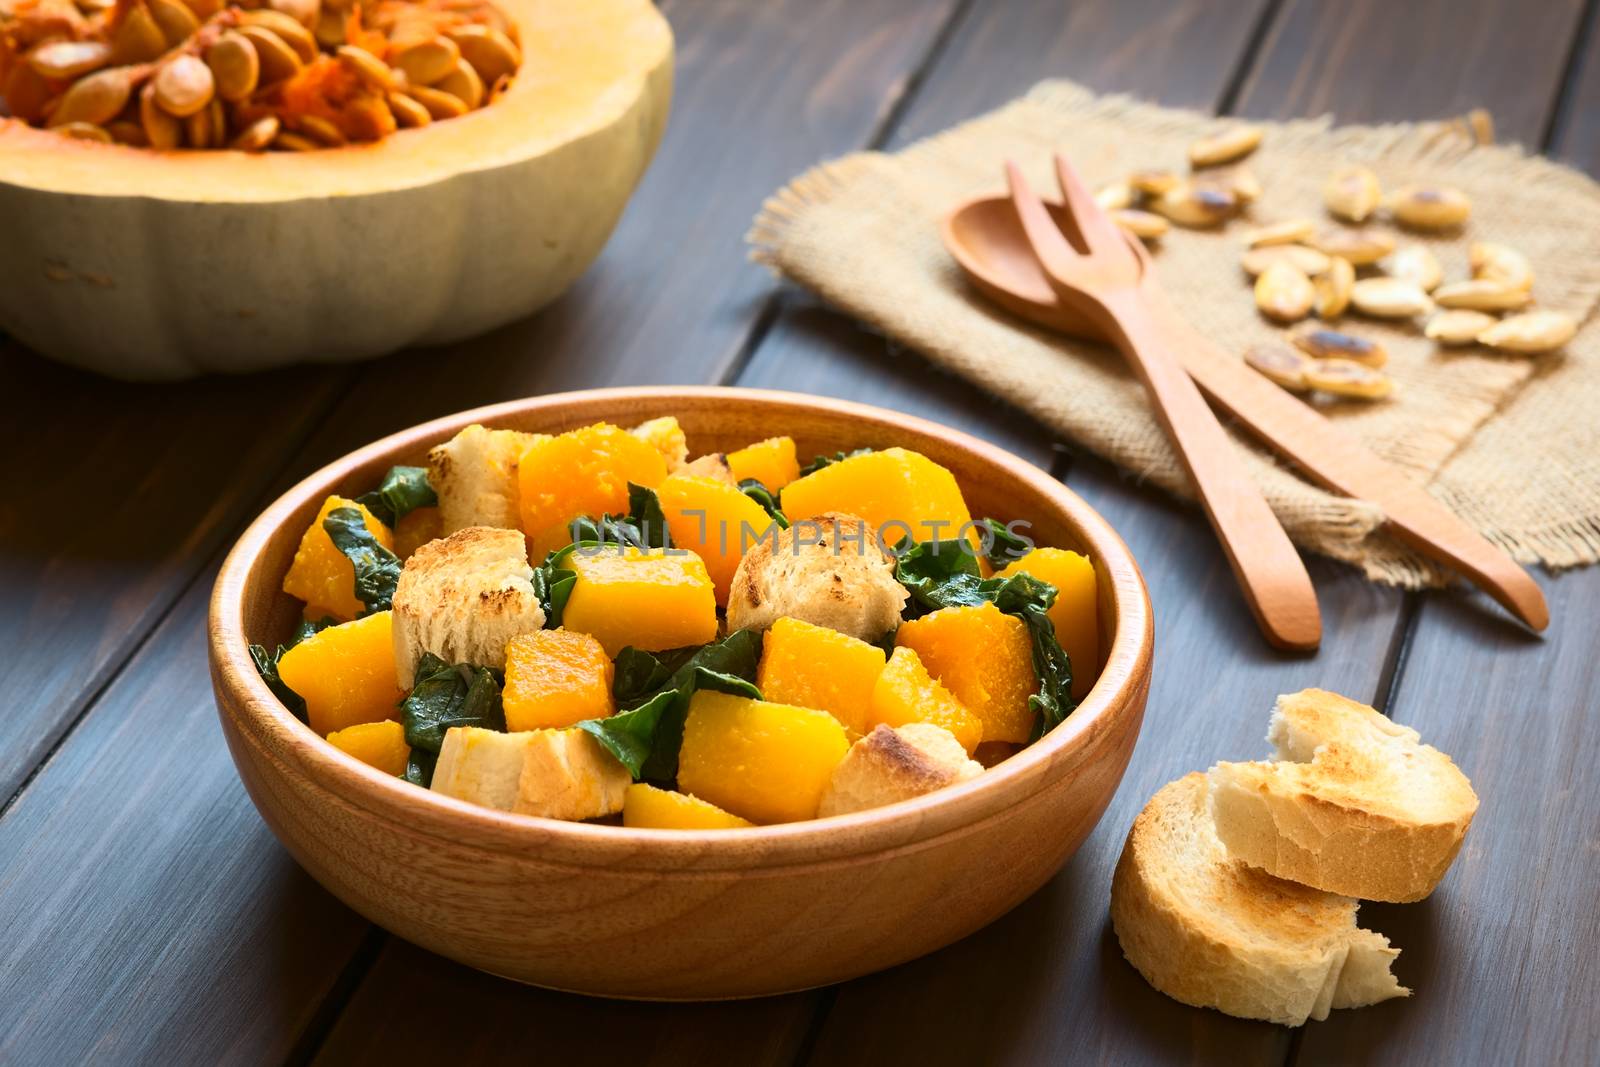 Pumpkin and Chard Salad with Croutons by ildi